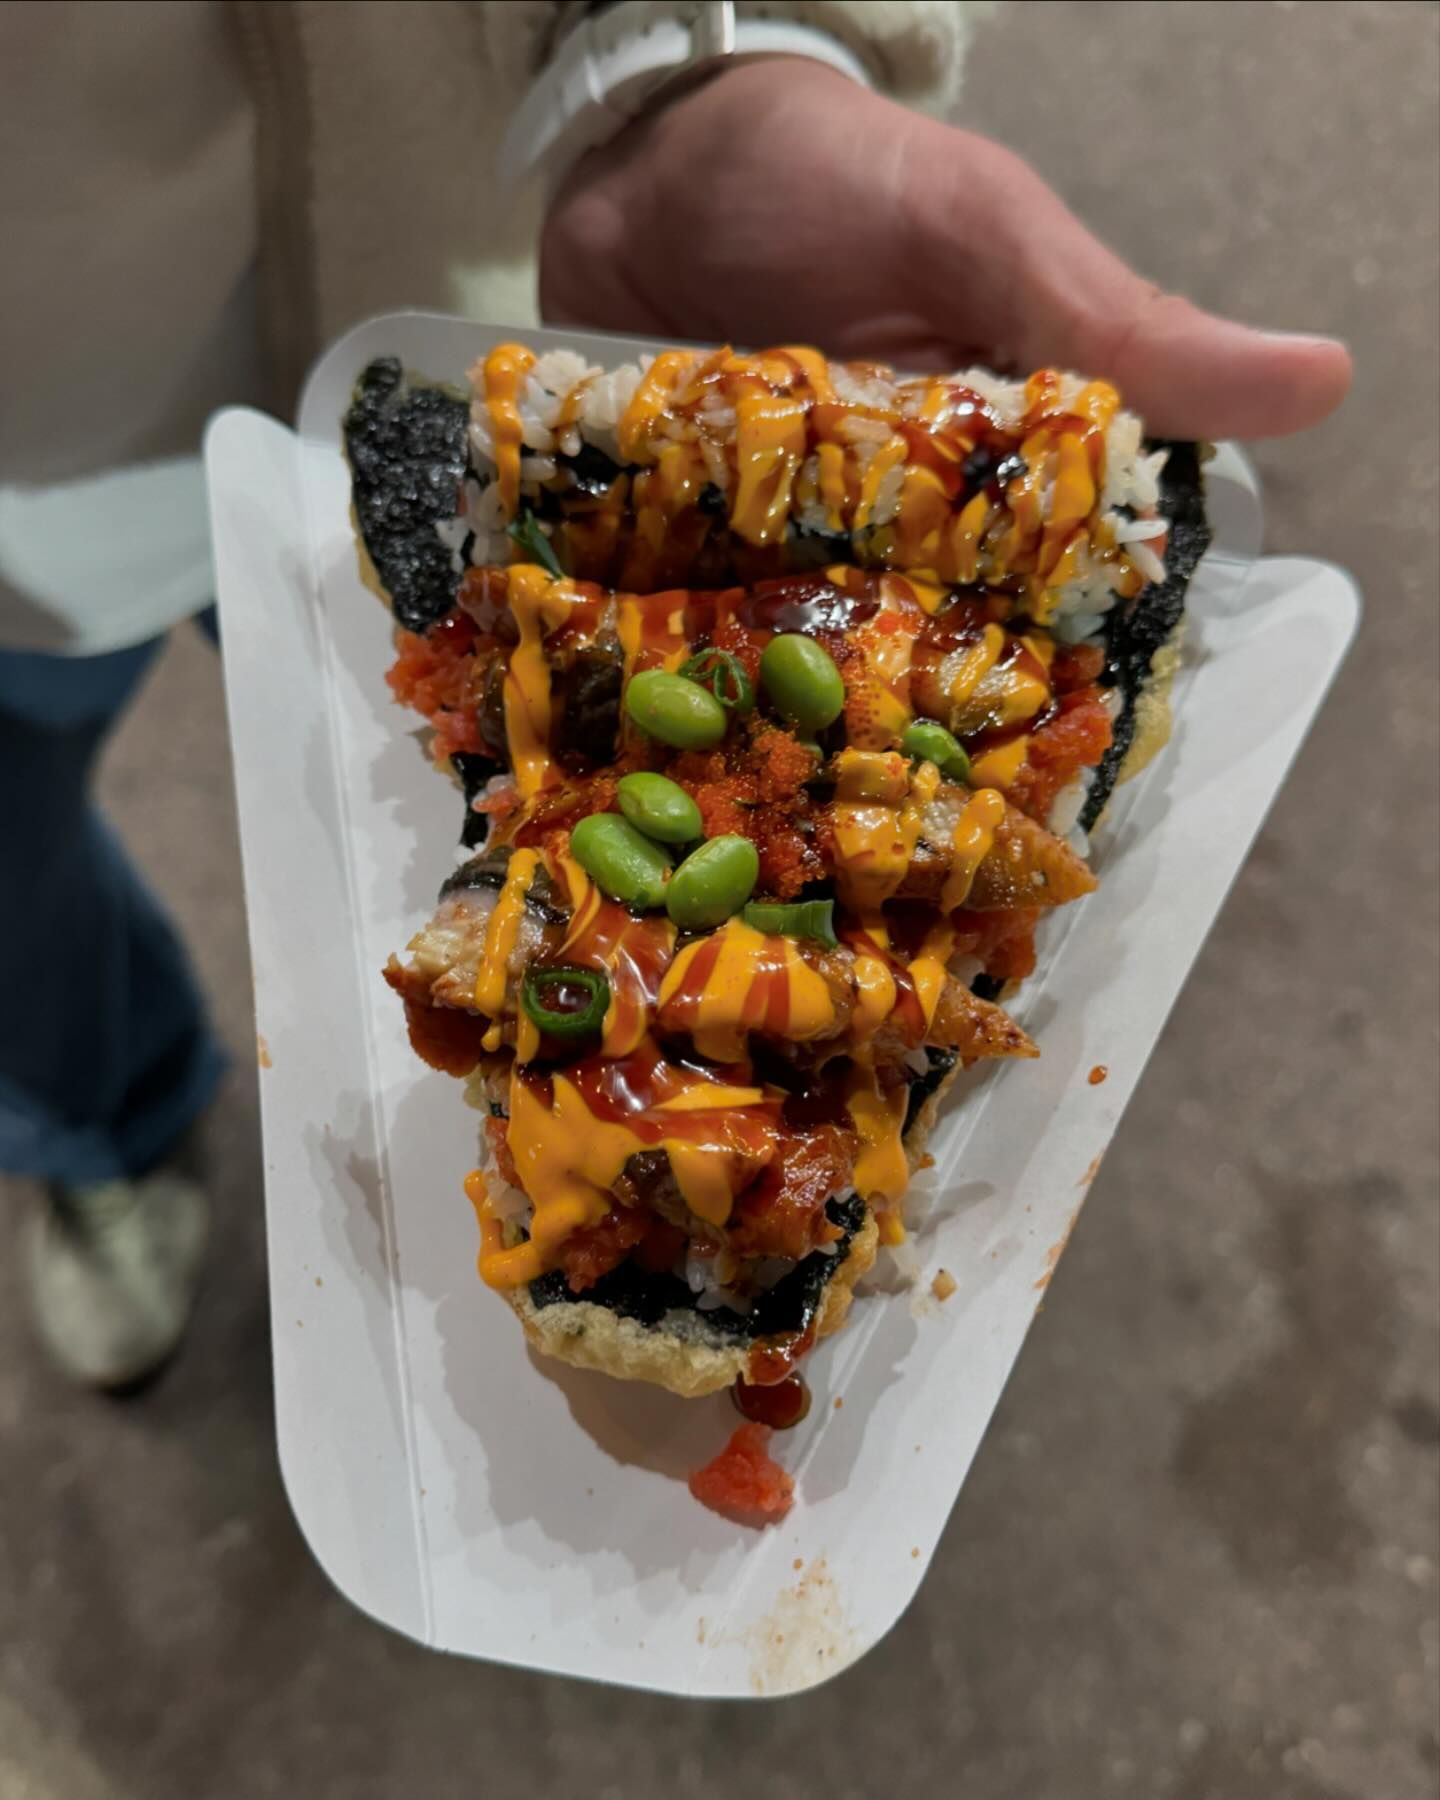 swipe to see my favorite thing at the food festival.. sushi pizza! 🤤 I still dream about it tbh